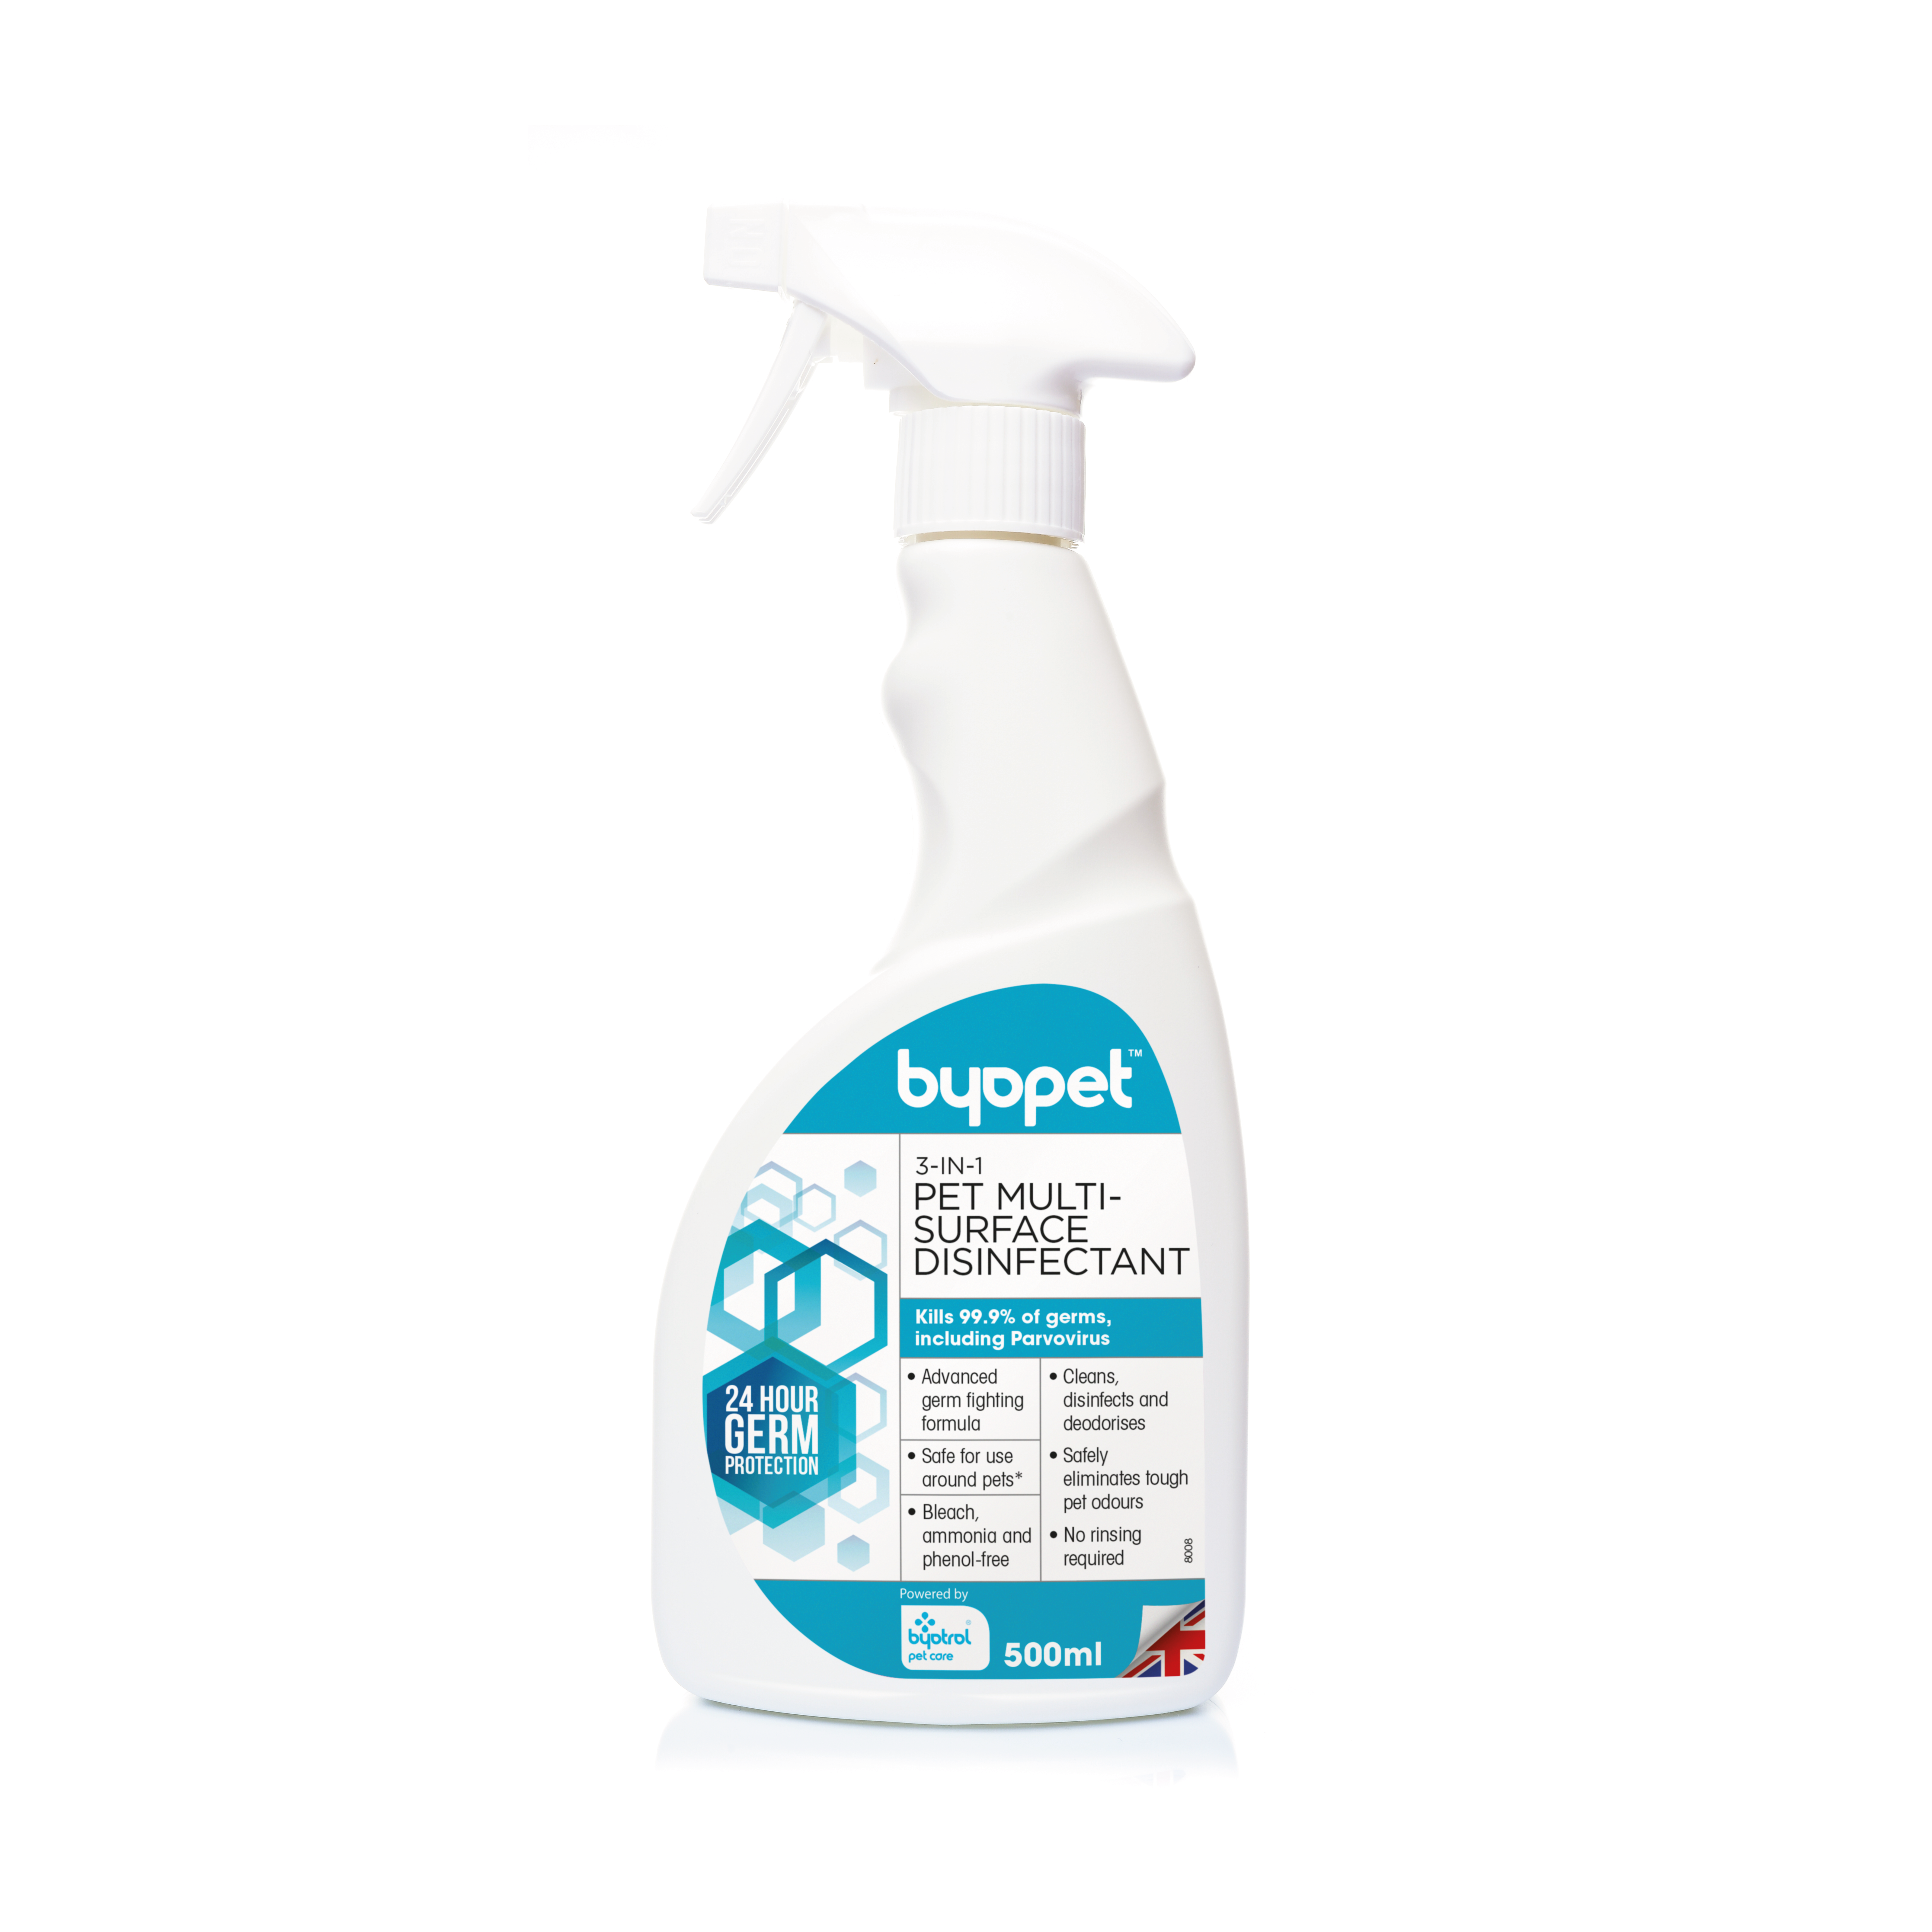 Byopet 3 in 1 Multi-Surface Pet Disinfectant